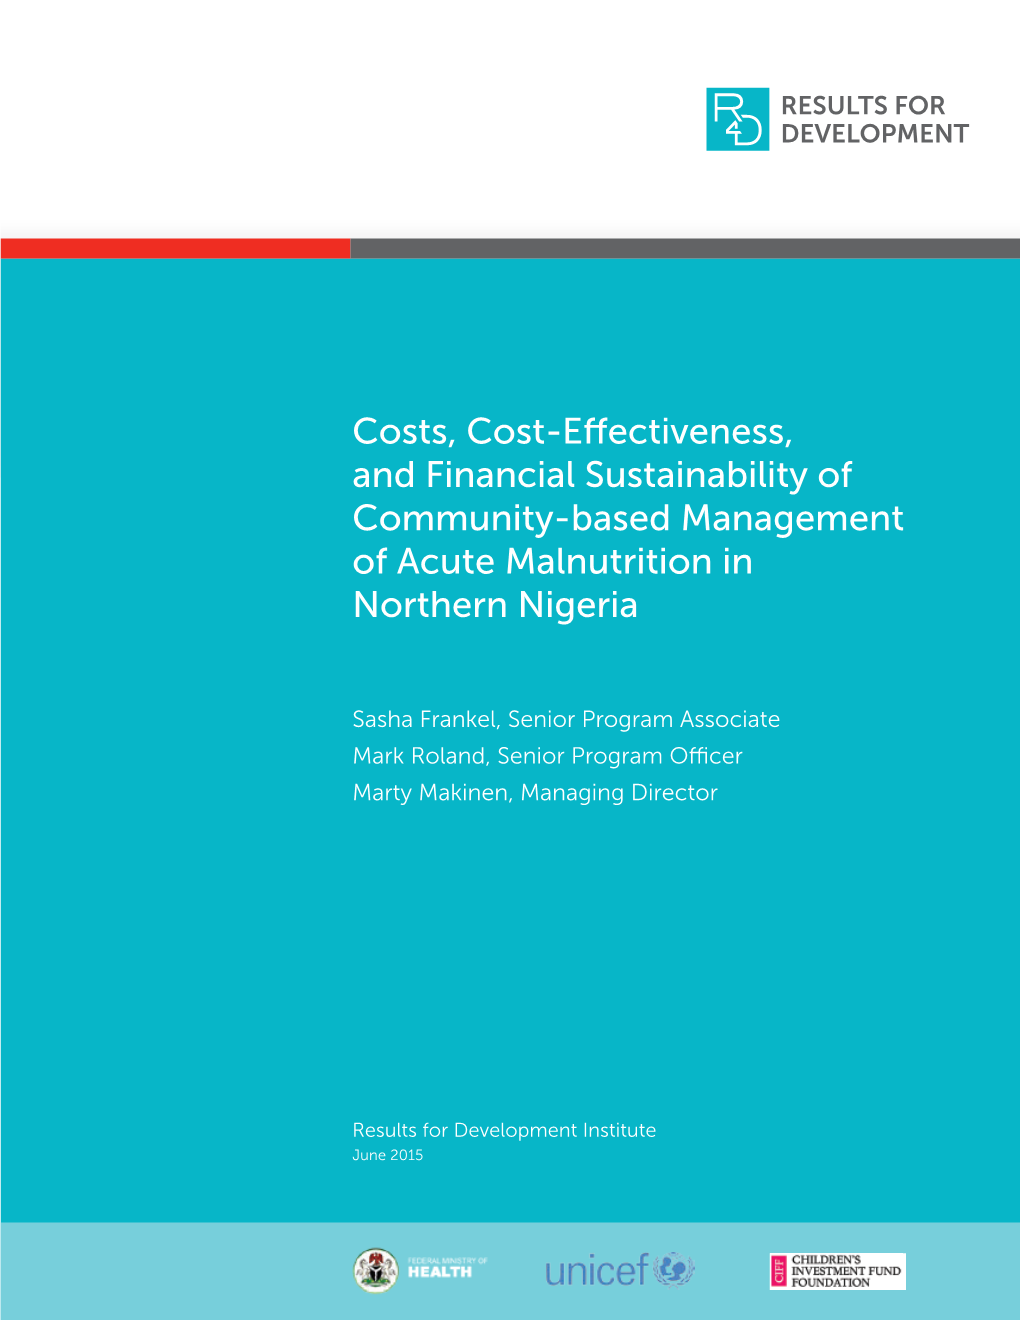 Costs, Cost-Effectiveness, and Financial Sustainability of Community-Based Management of Acute Malnutrition in Northern Nigeria